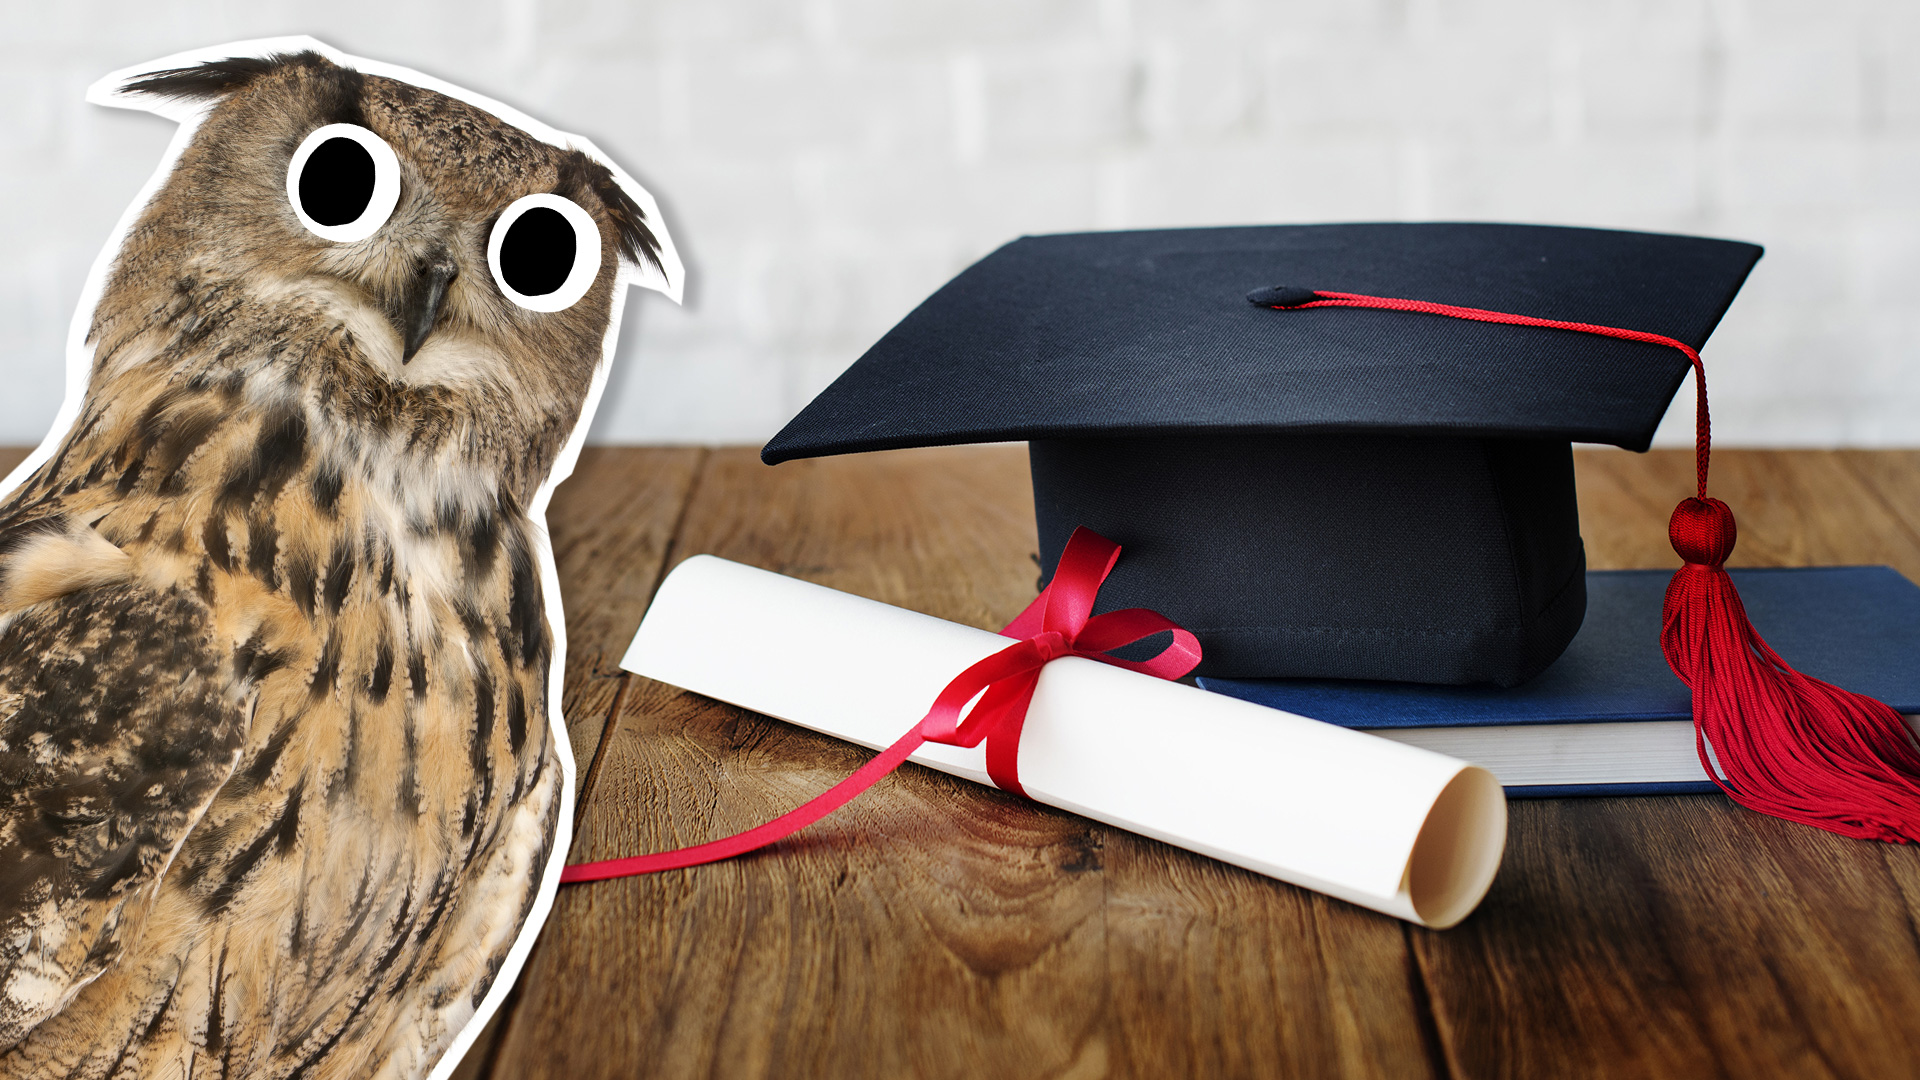 An owl and a university mortar board